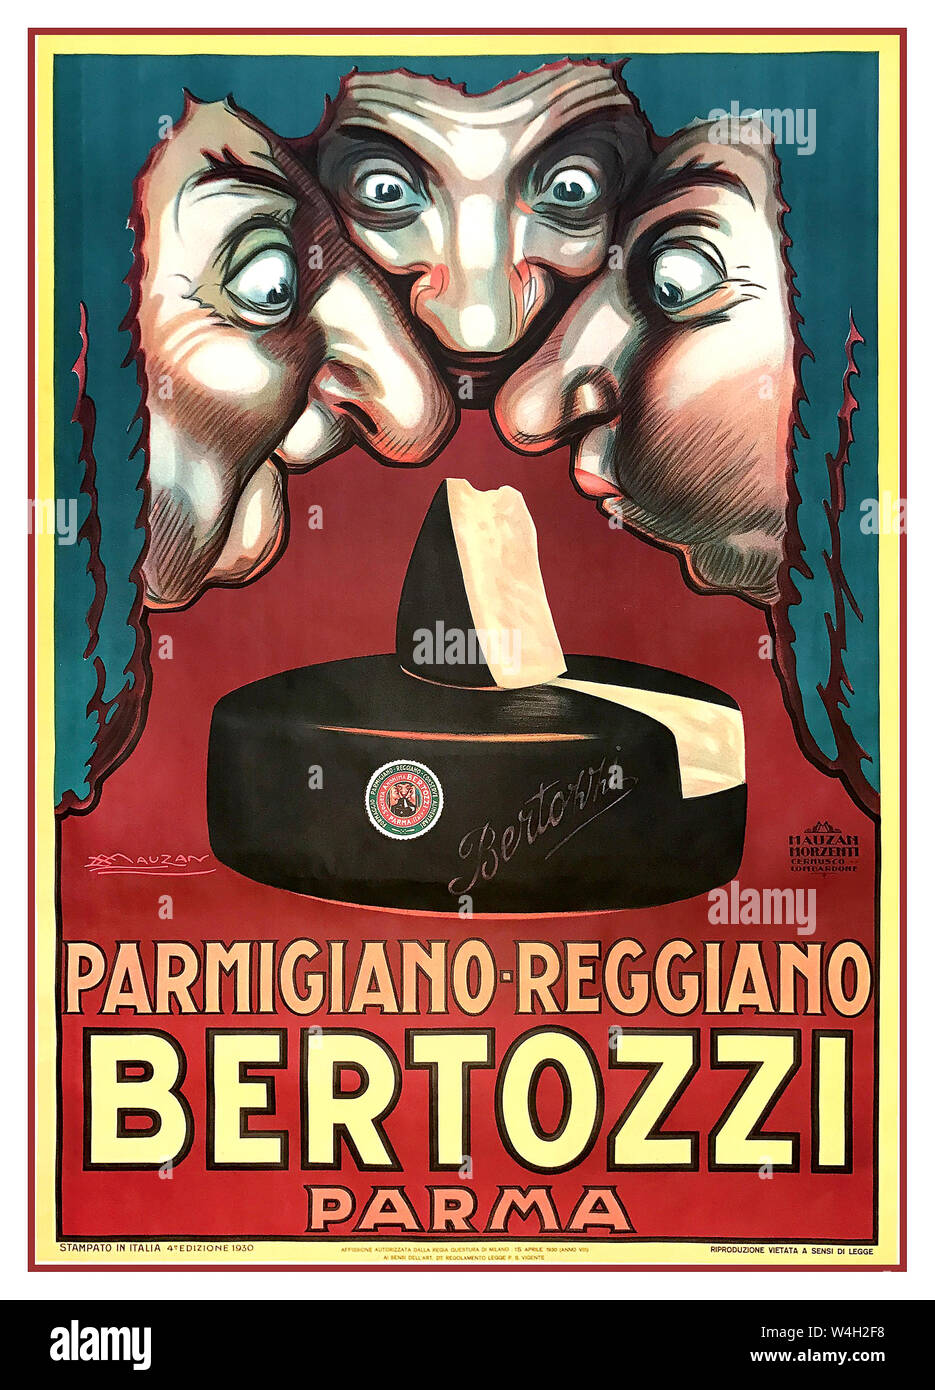 Vintage 1930's Italian Cheese Poster by Achille Luciano Mauzan (1883 – 1952), PARMIGIANO REGGIANO BERTOZZI PARMA First edition lithographic poster. 1930. Typical example of the humour graphic by Mauzan, promoting the great Italian cheese from Parma and Reggio Emilia. Stock Photo